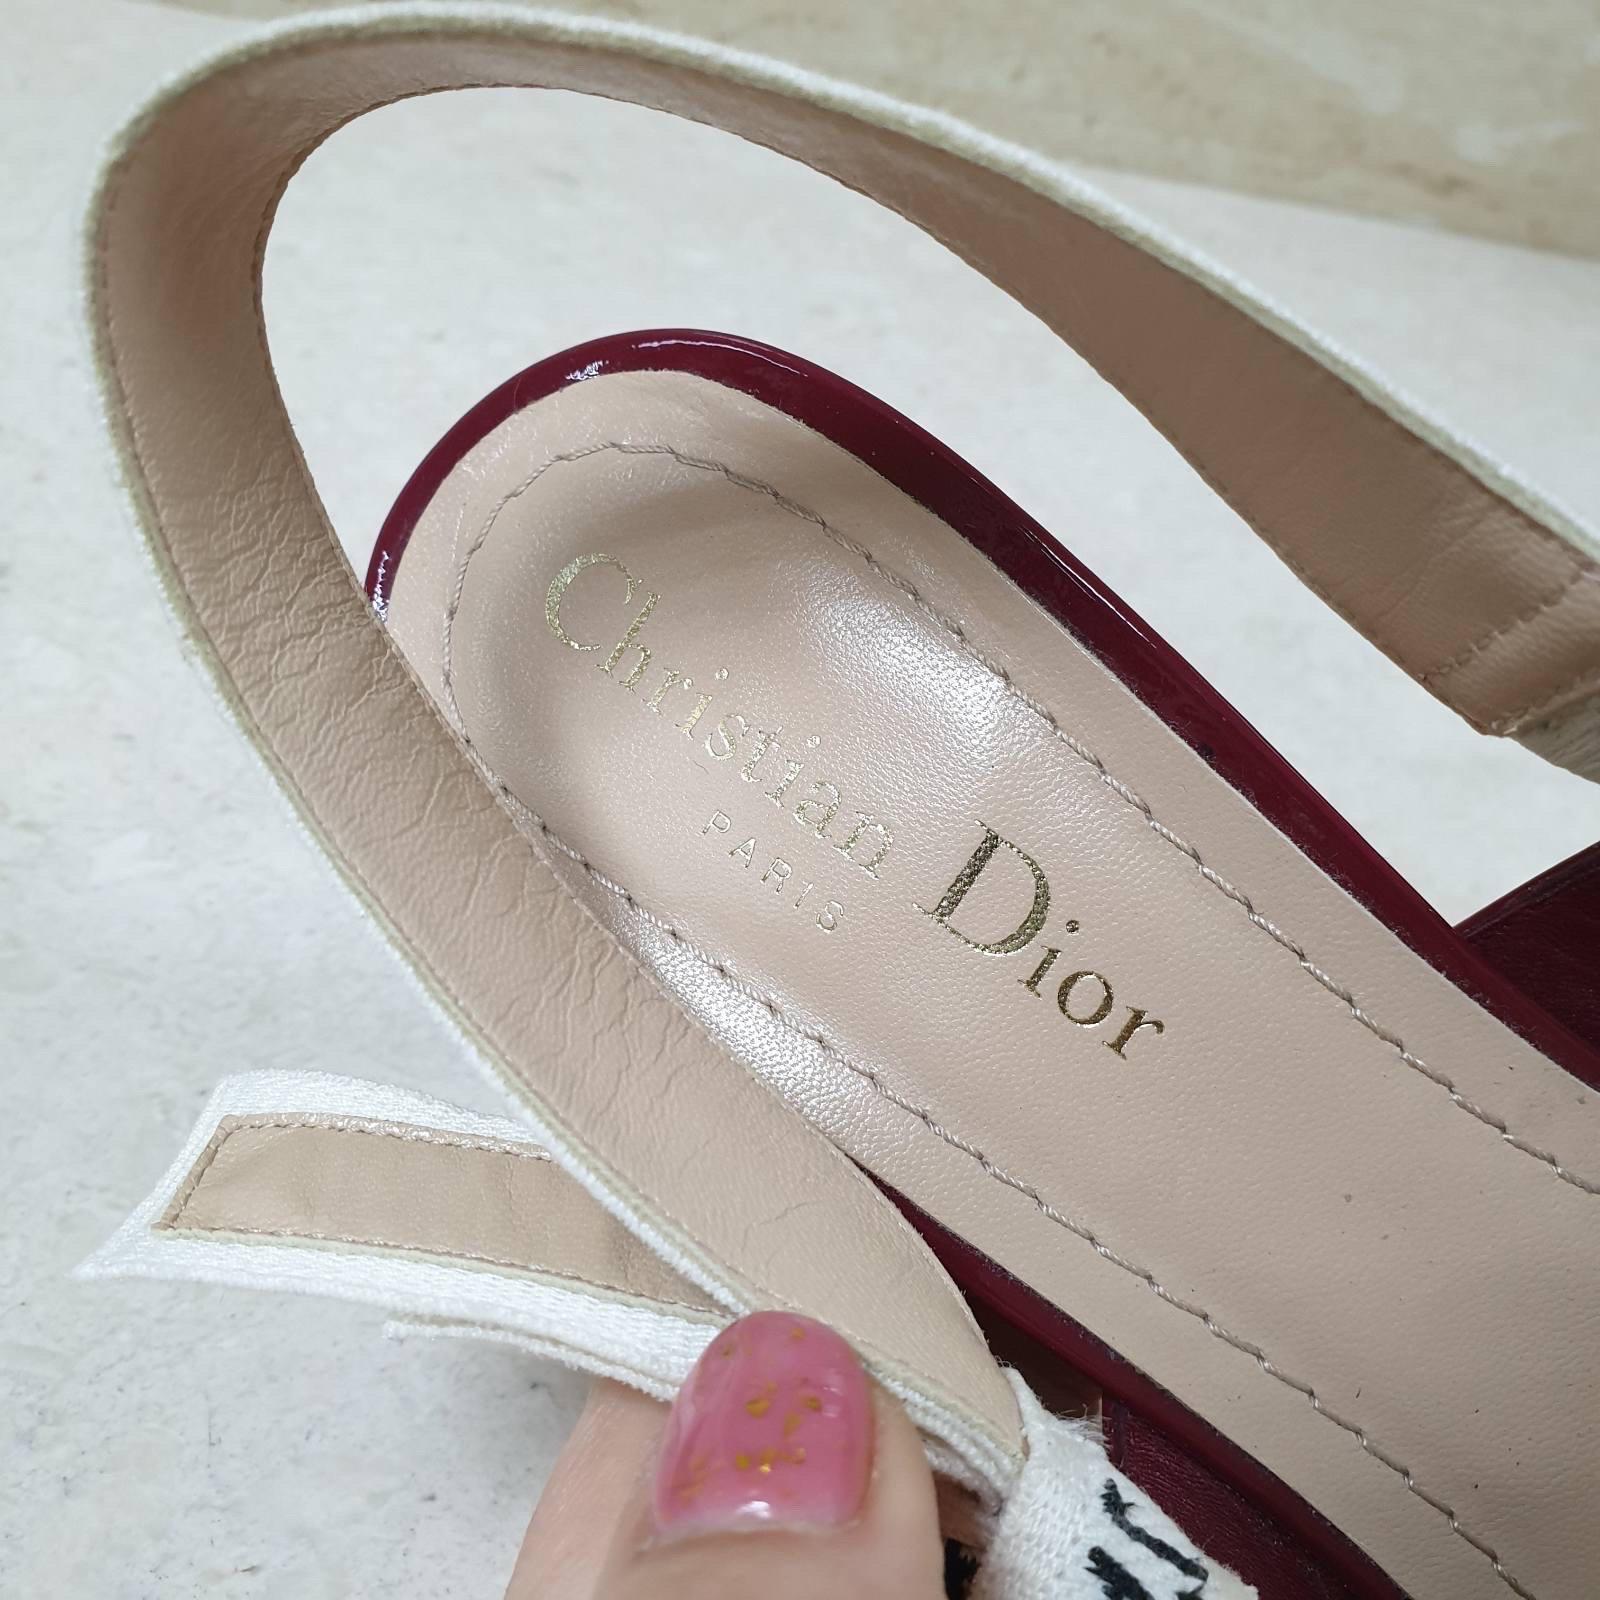 Dior burgundy patent leather burgundy pointed toe slingback pumps with J'Adior print with 7cm heel height
 
Material:Patent Leather
Color: Burgundy

Sz.38

Very good condition.

No box. No dust bag.